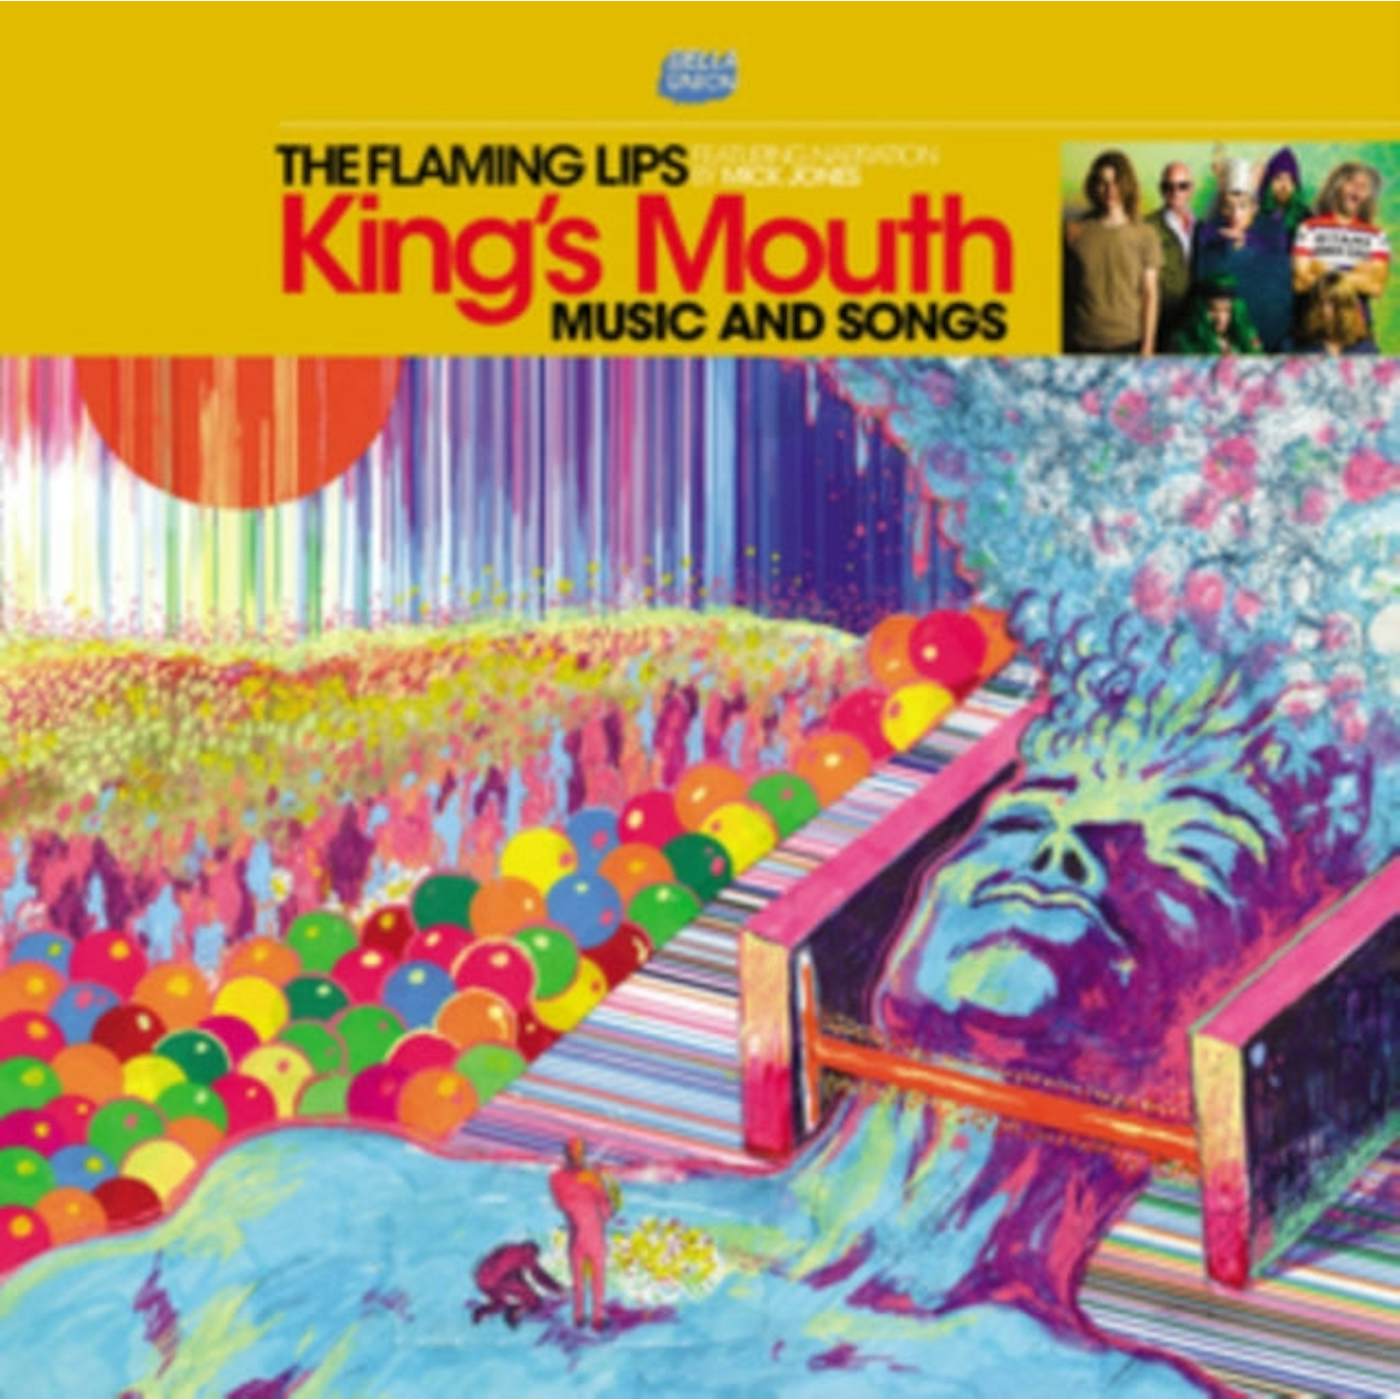 The Flaming Lips LP Vinyl Record - Kings Mouth